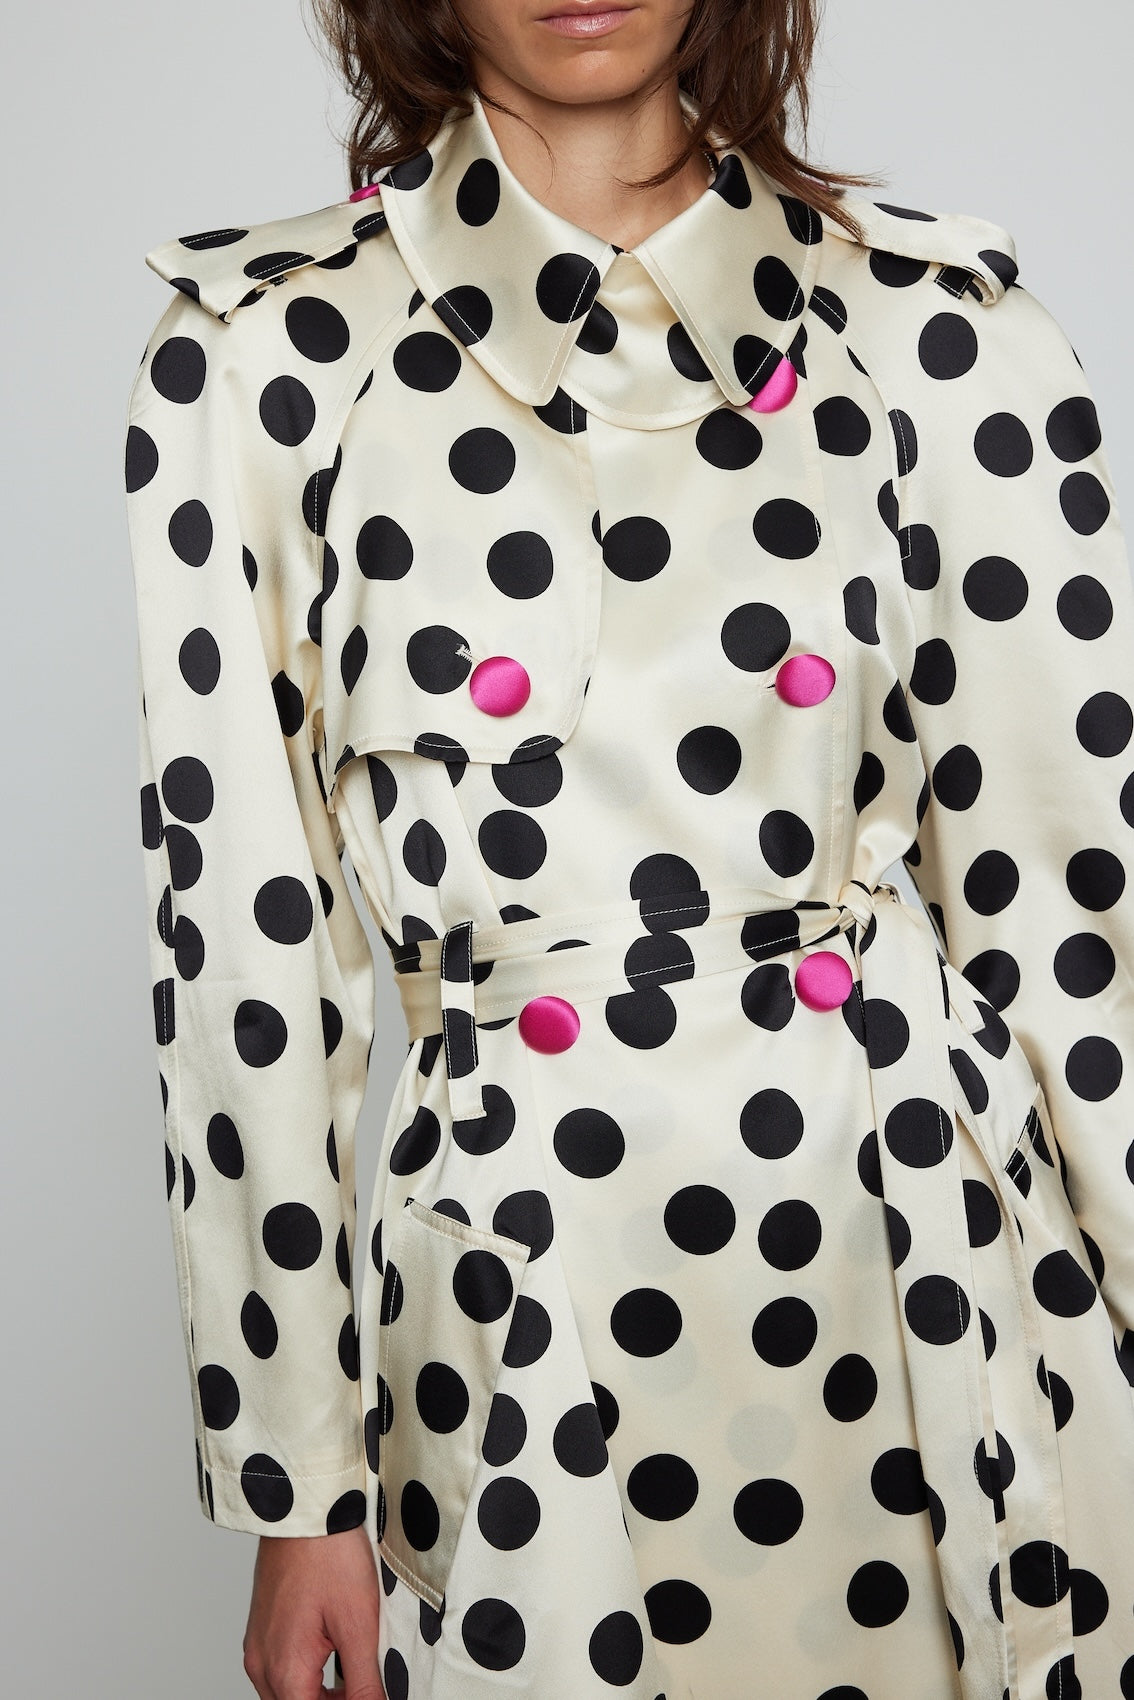 Caro Editions Roberta Coat features a black and white polka dot print on heavy cream-colored silk, with a matching belt and pink silk-covered buttons. Material: 100% Silk.